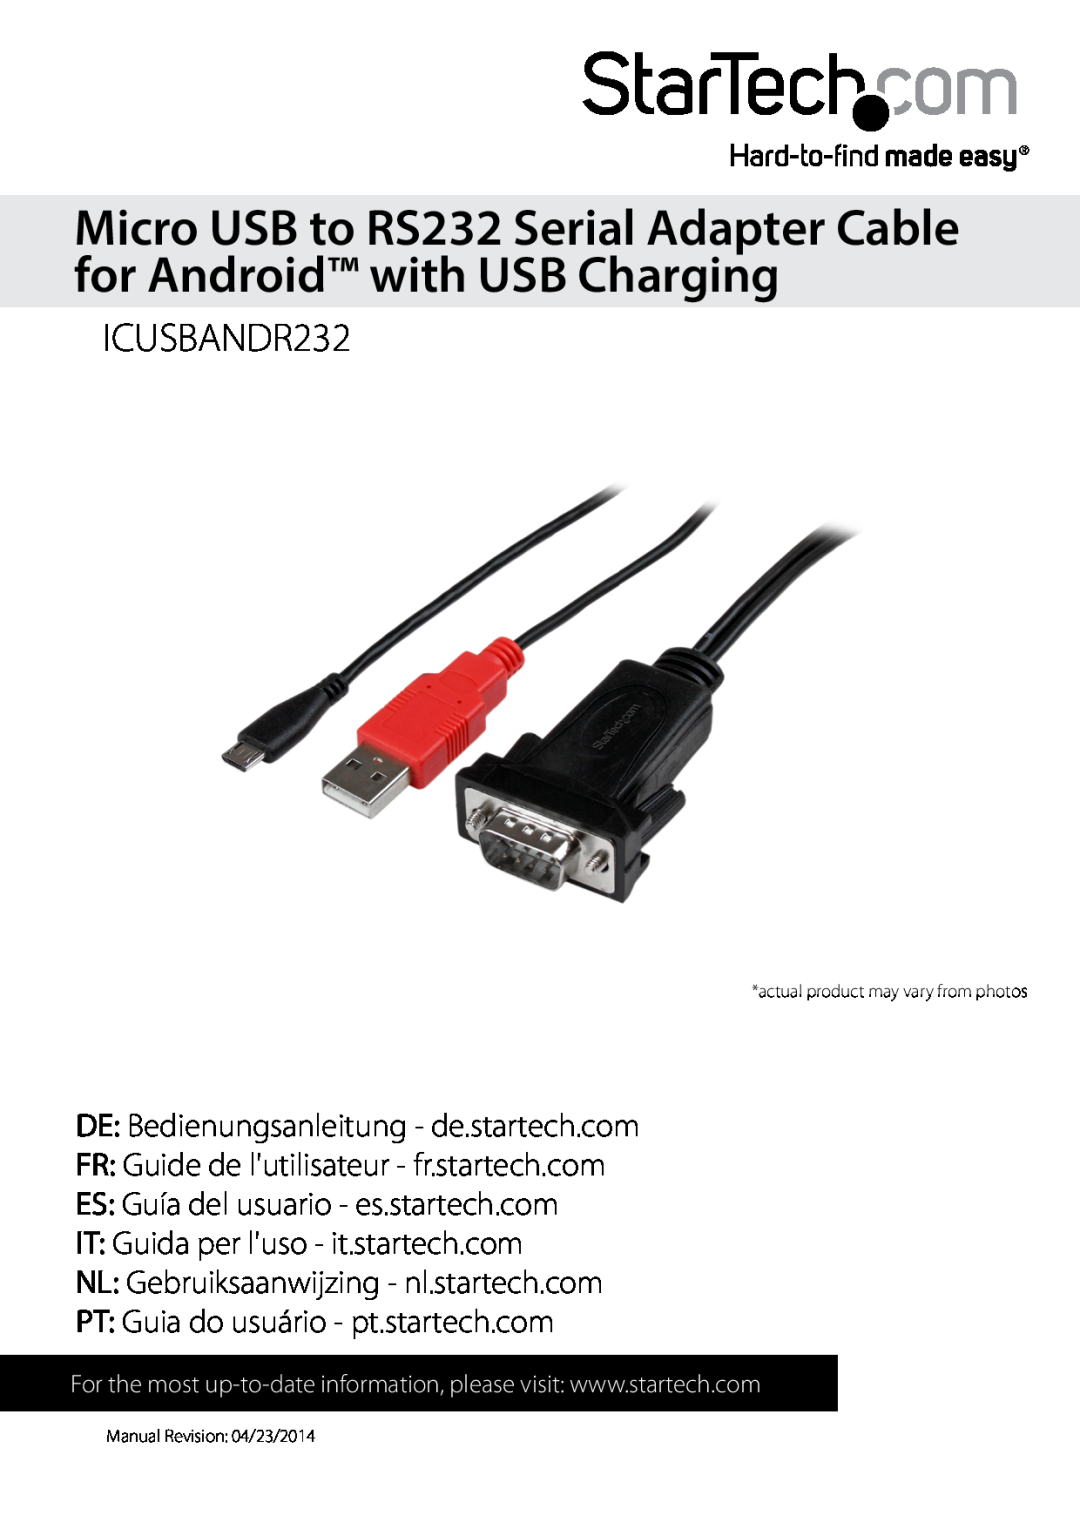 StarTech.com manual Micro USB to RS232 Serial Adapter Cable for Android with USB Charging, ICUSBANDR232 